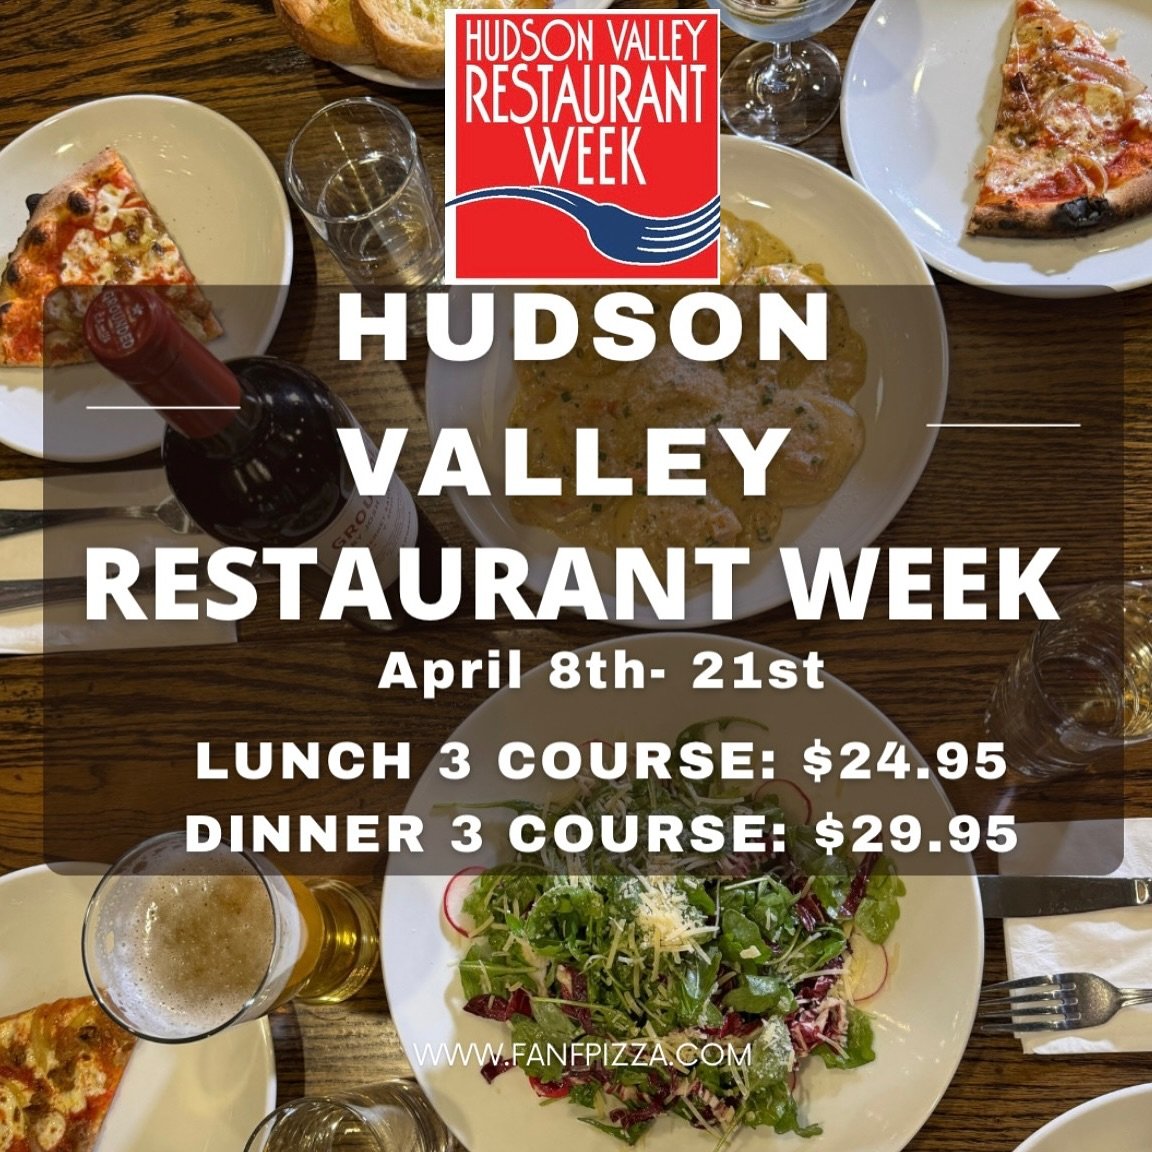 Restaurant Week starts Today! 

Make sure to come see us before or after your eclipse viewing today! ☀️🌗

Hudson Valley Restaurant Week has started! 

We&rsquo;re delighted to invite you for a 3-course prix fixe meal dinner menu starting at $24.95 L